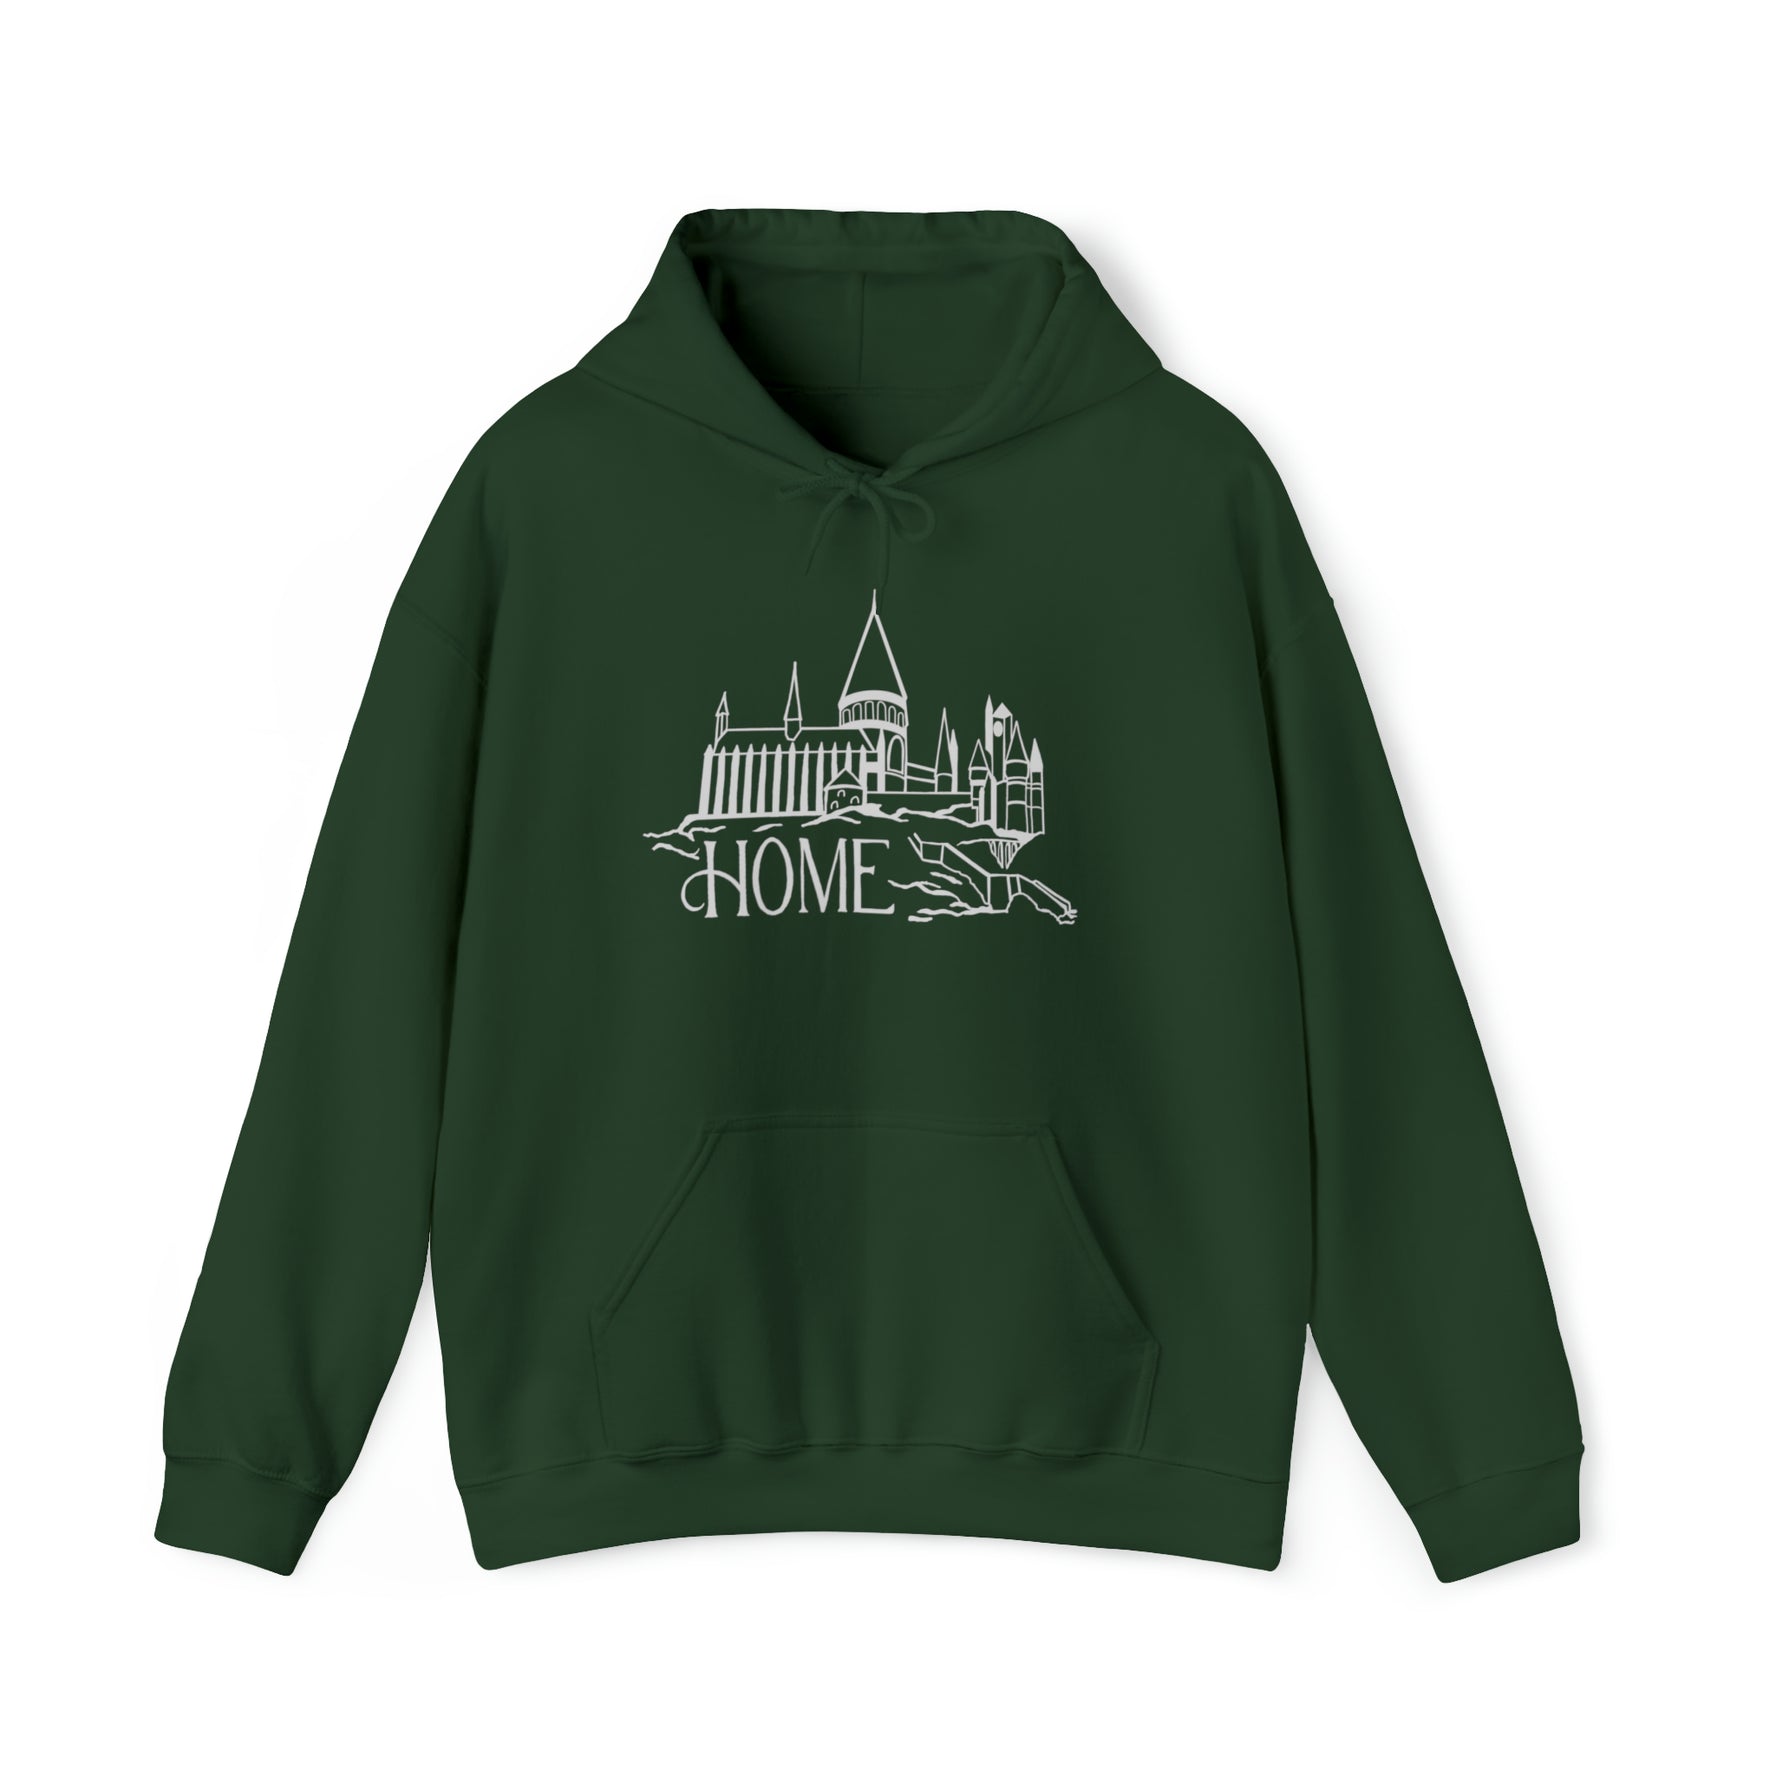 Home: AMBITIOUS Embroidered Sweatshirt